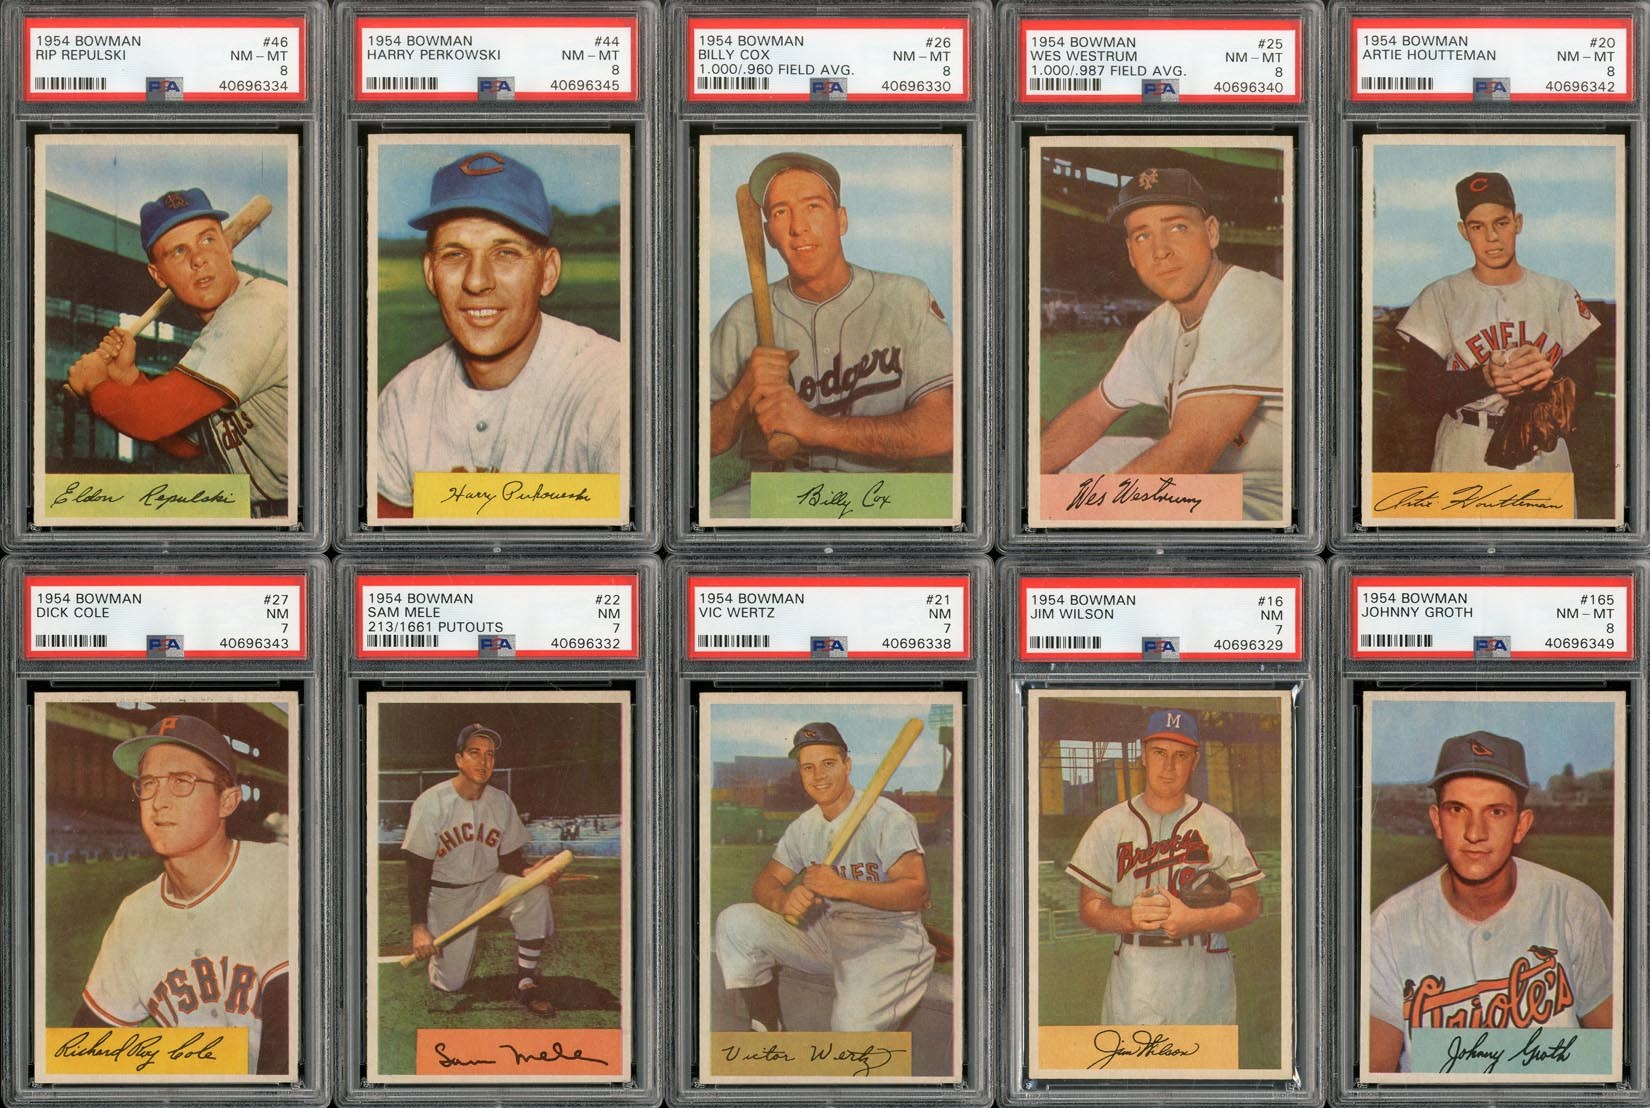 Baseball and Trading Cards - 1954 Bowman PSA Graded HIGH GRADE Collection